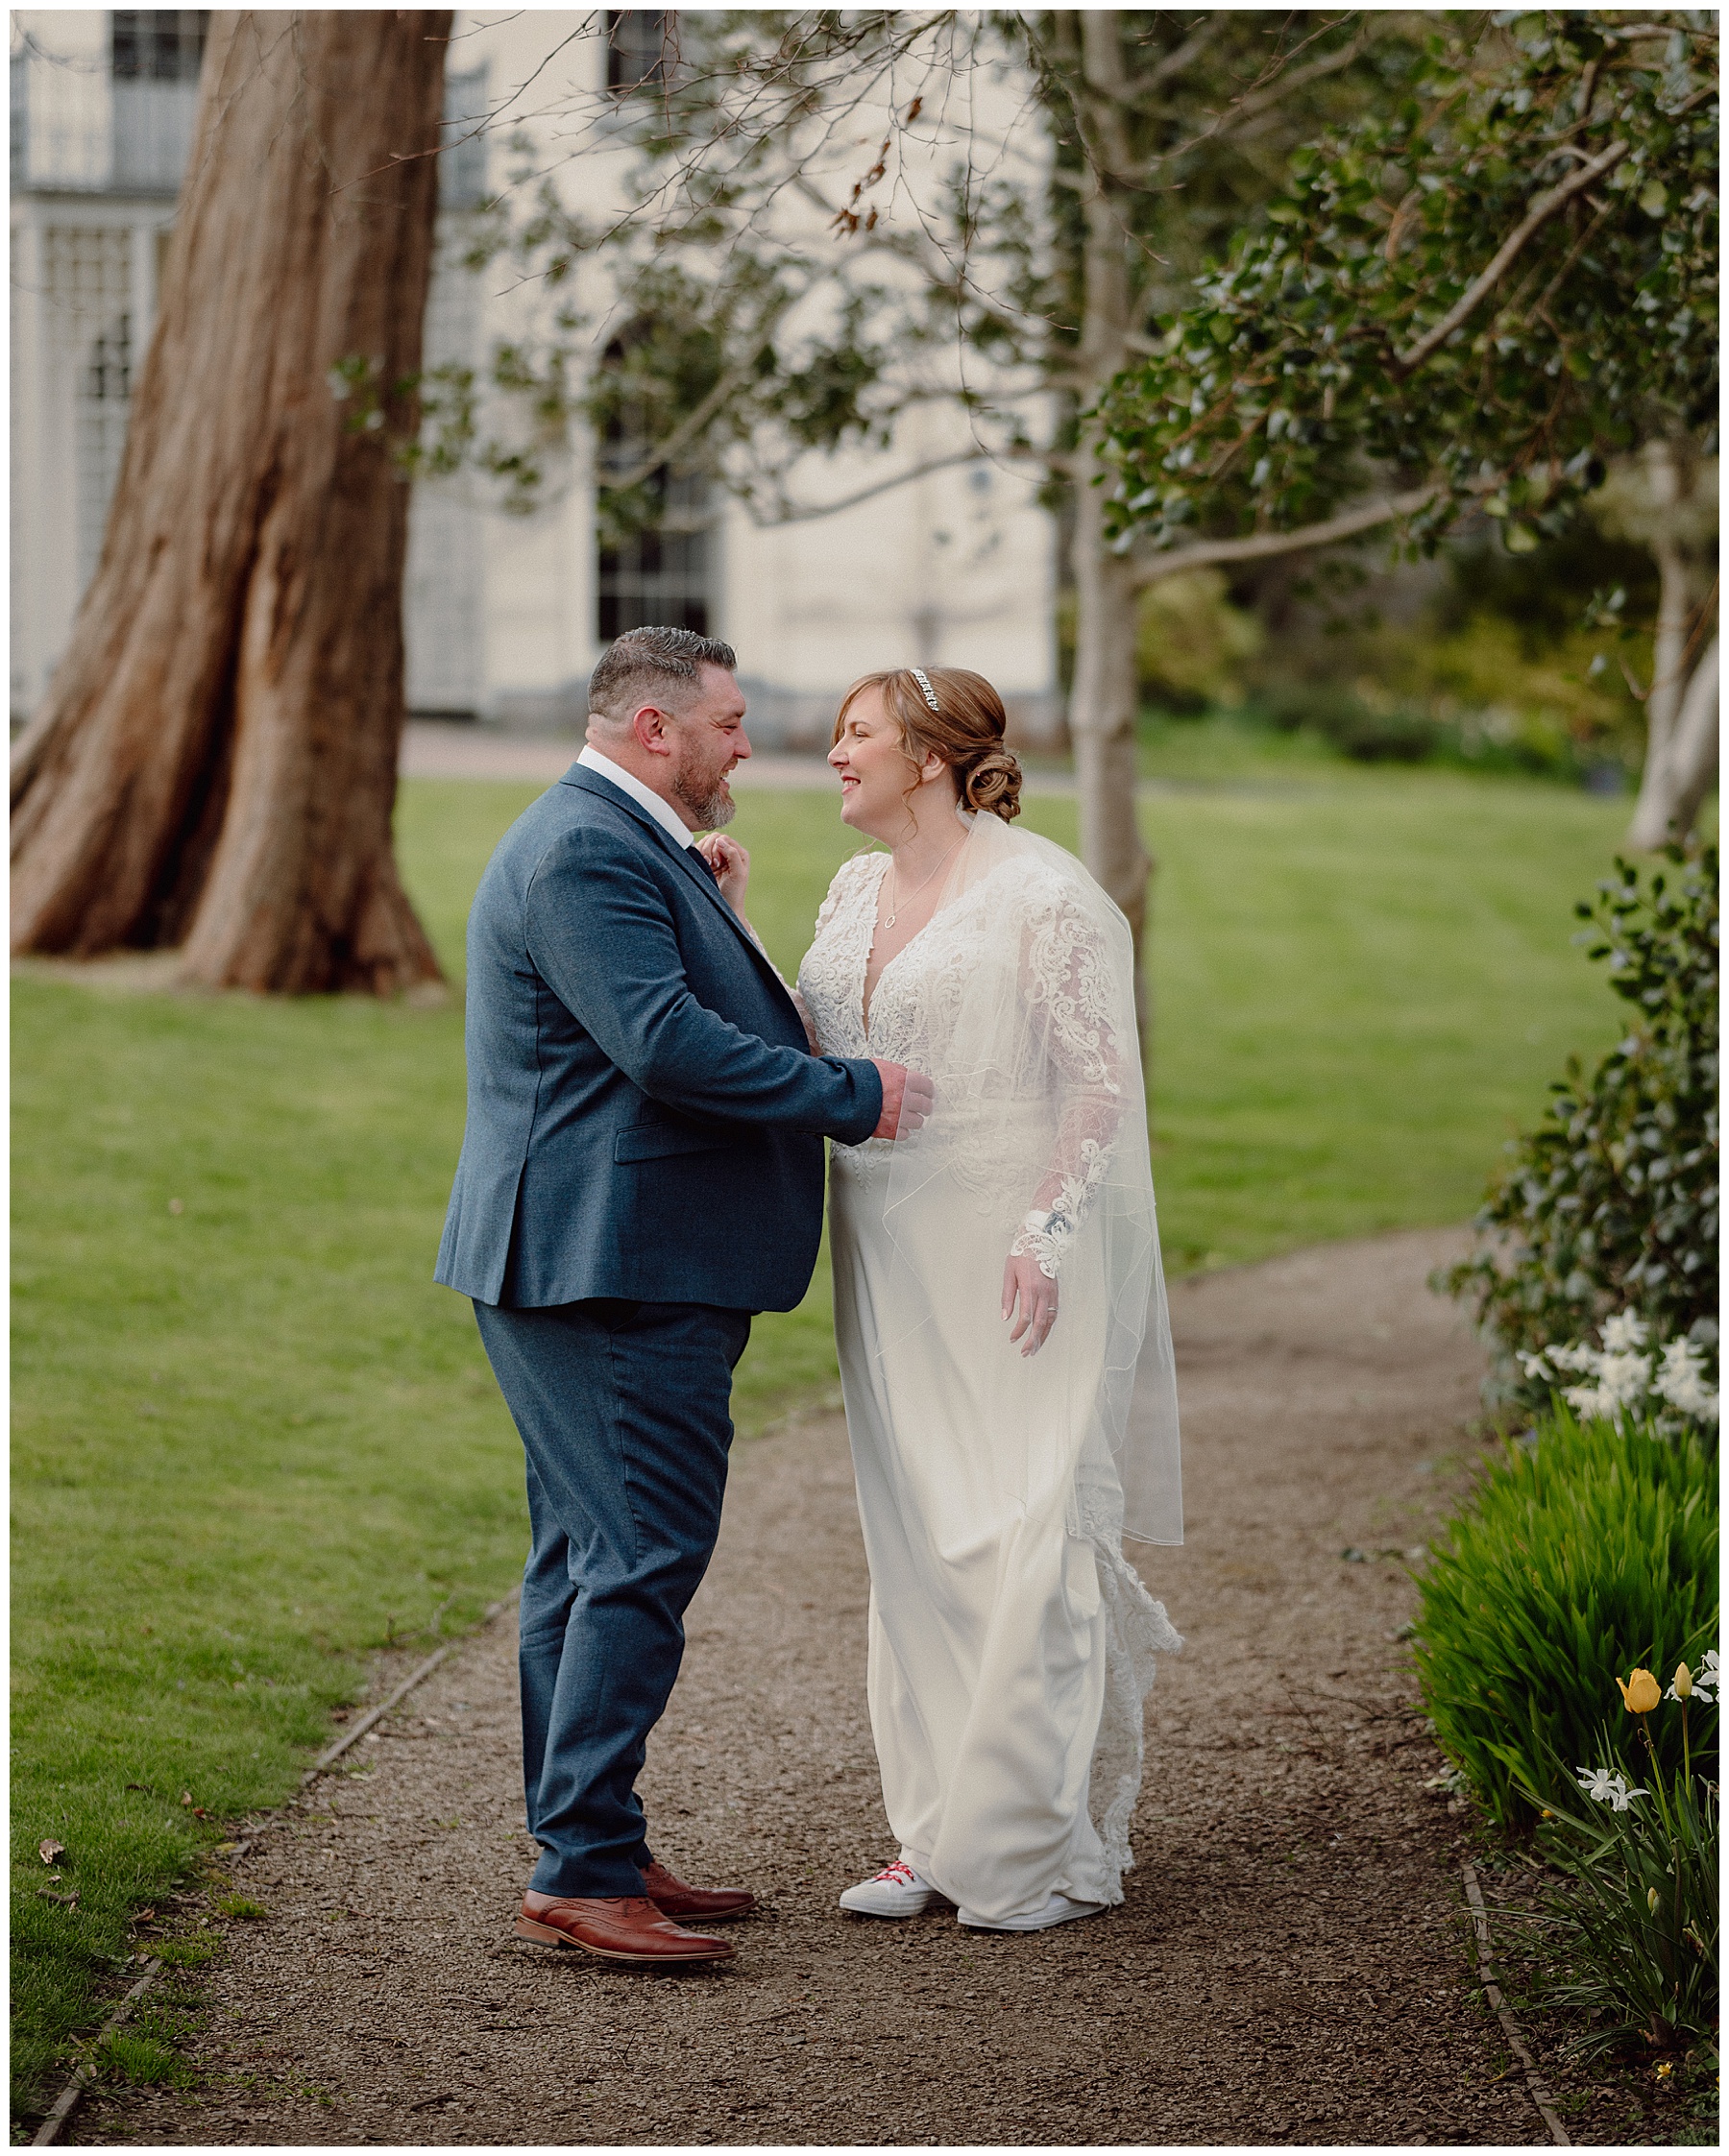 Wedding Photos in grounds at Cardigan Castle